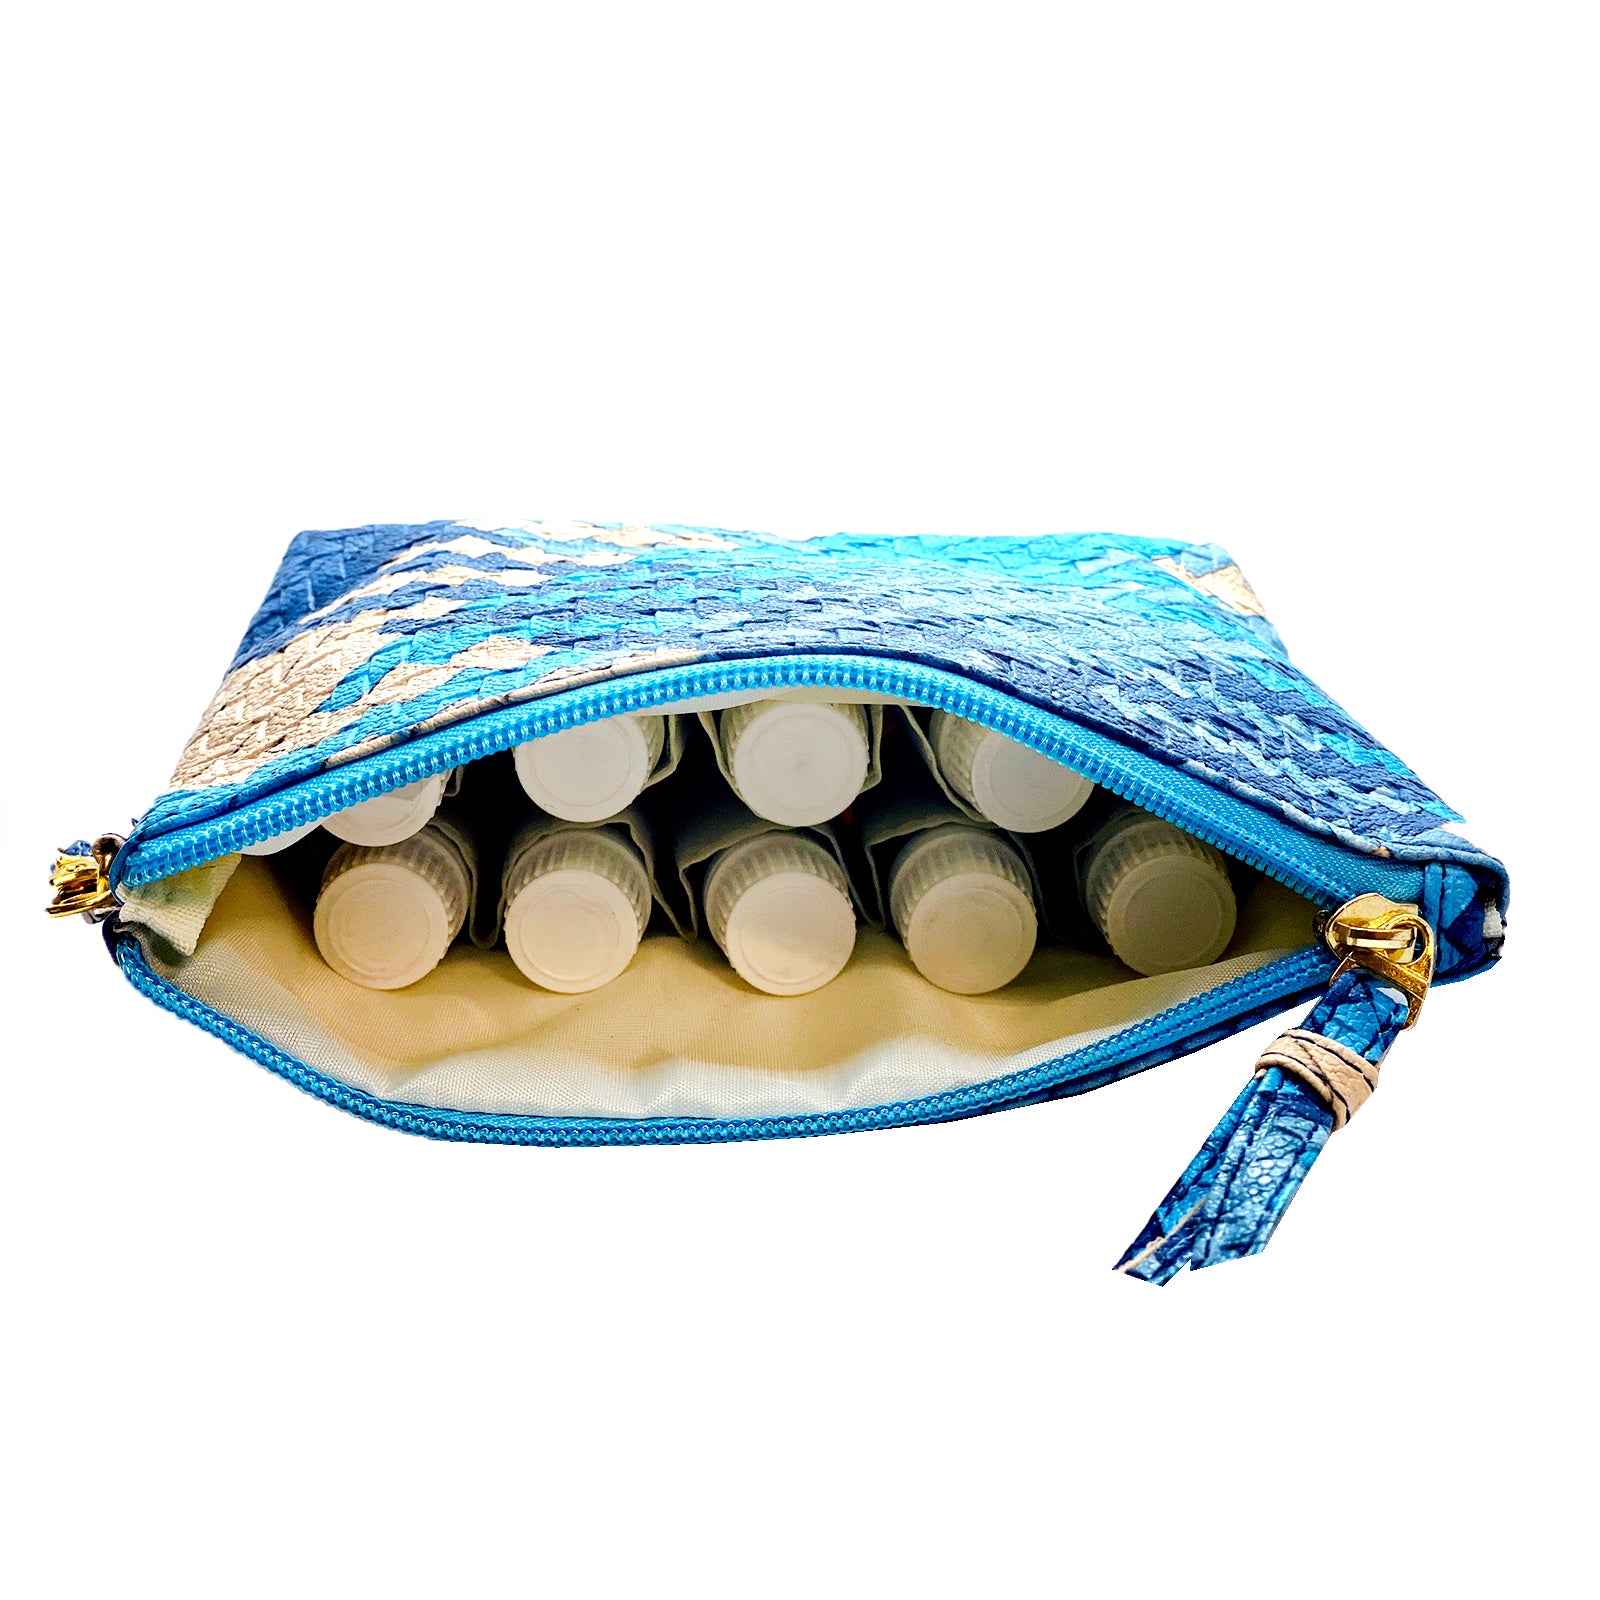 Cosmetic bag (for 10 essential oils)